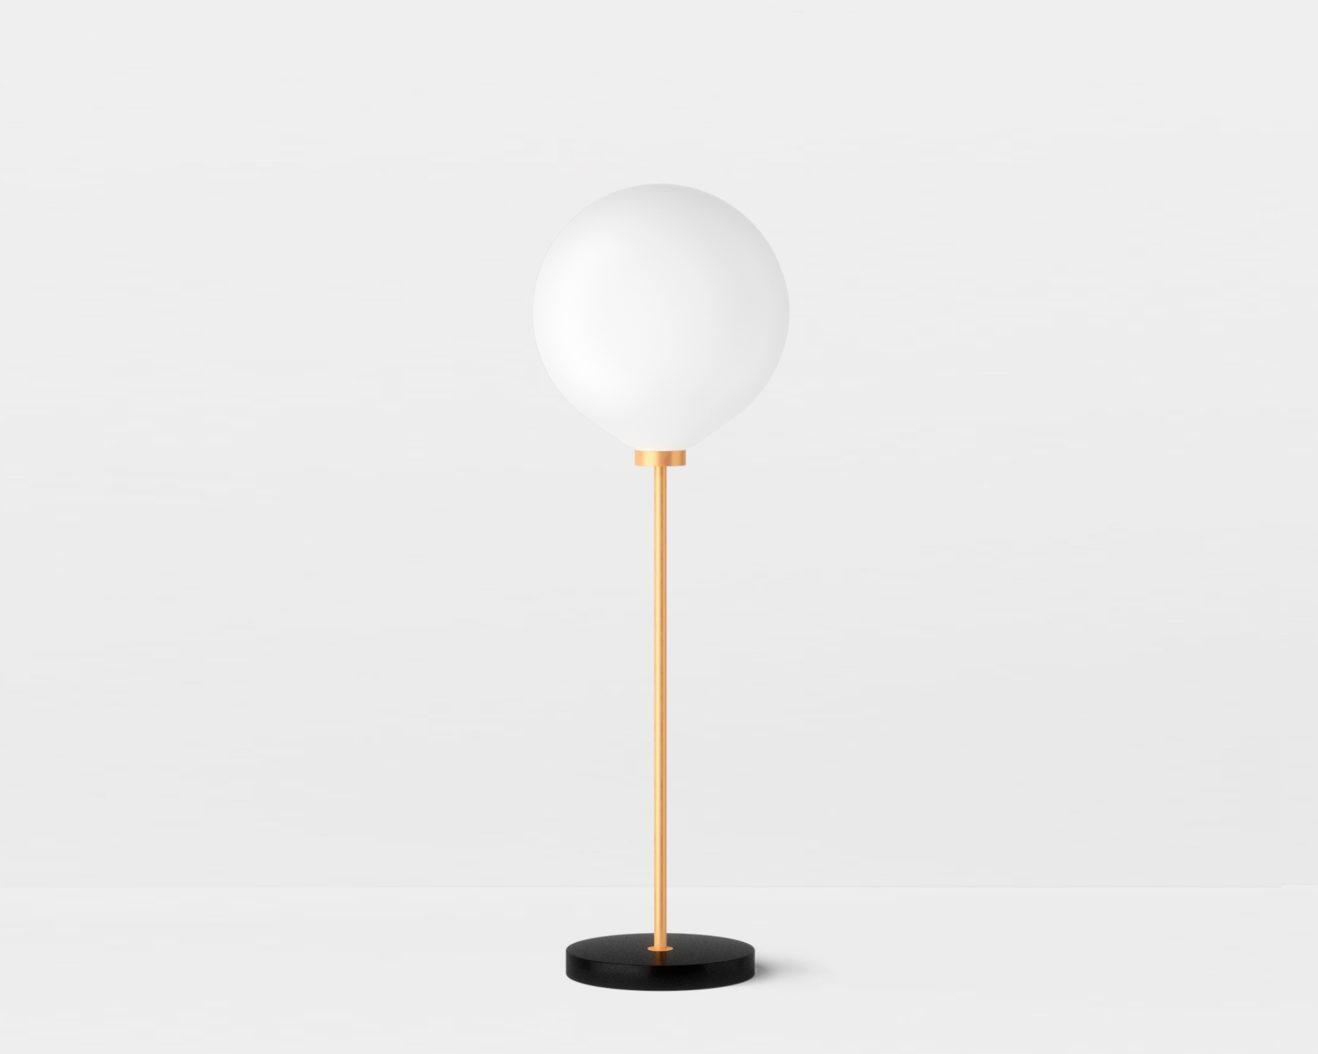 Onis is a Minimalist table lamp design by Wishnya Design Studio.
Brass.
White marble or black granite.

There are three shapes available: Circle / Triangle / Square
Two finishes: white marble or black granite

H66cm – L20cm
LED G4 35W 220V